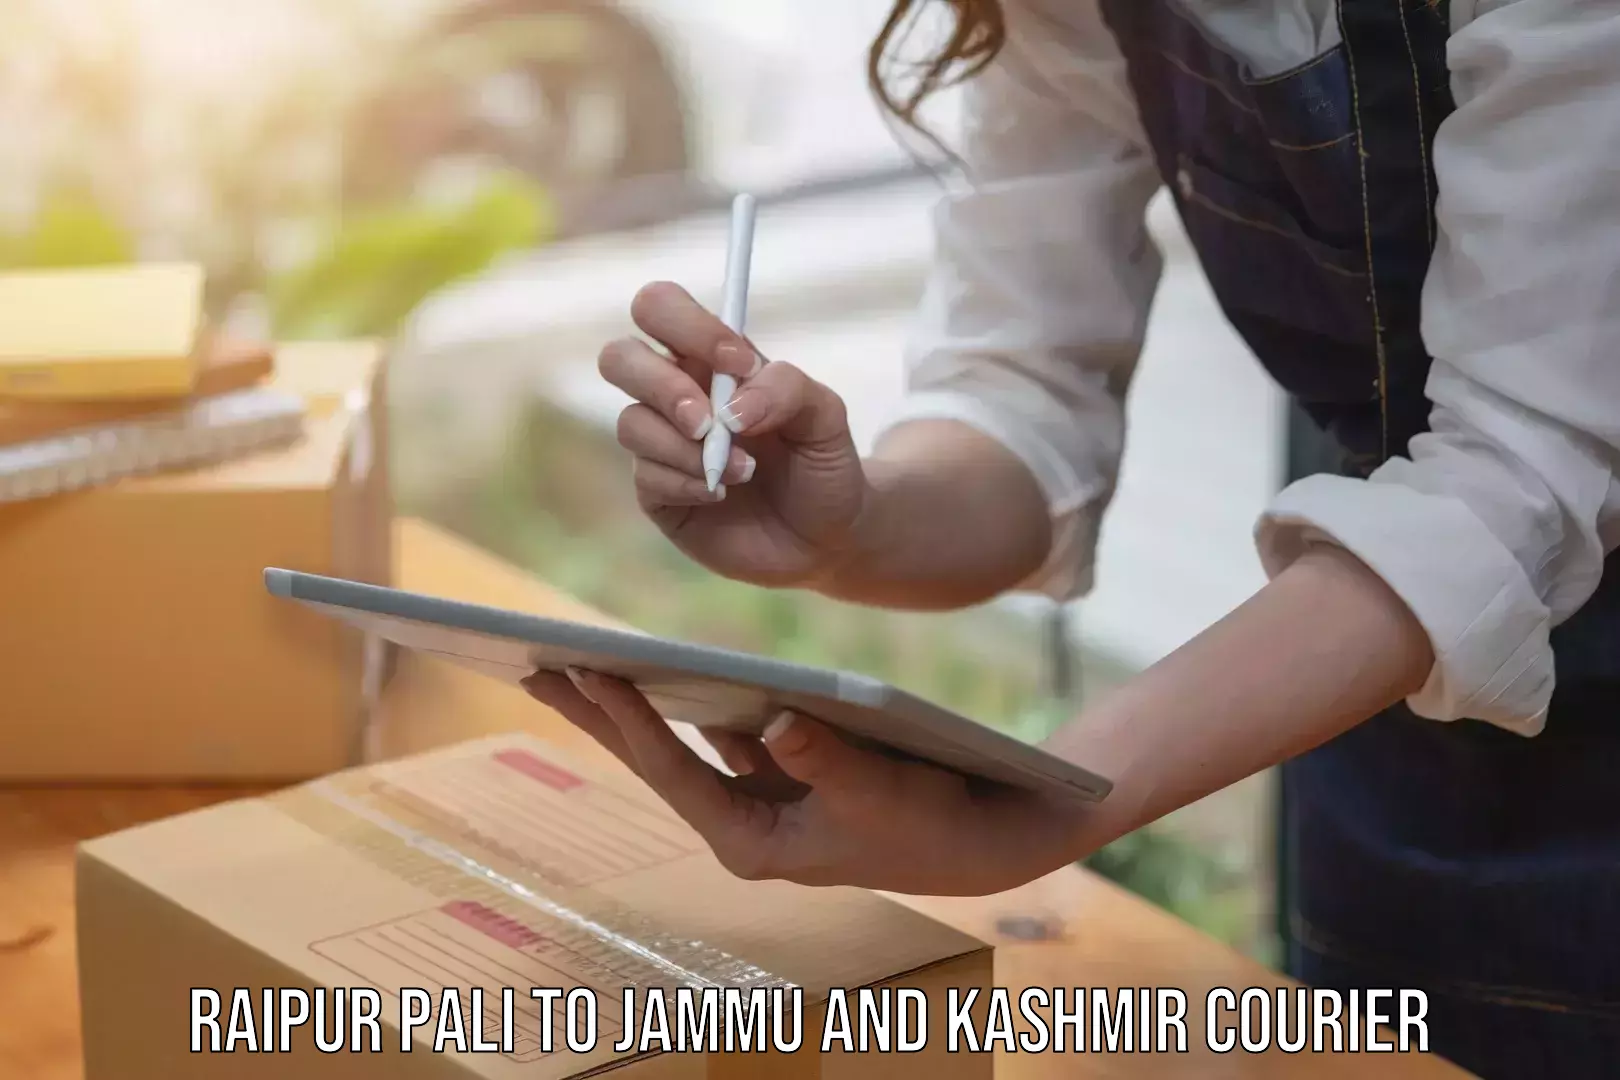 Professional courier services in Raipur Pali to Jammu